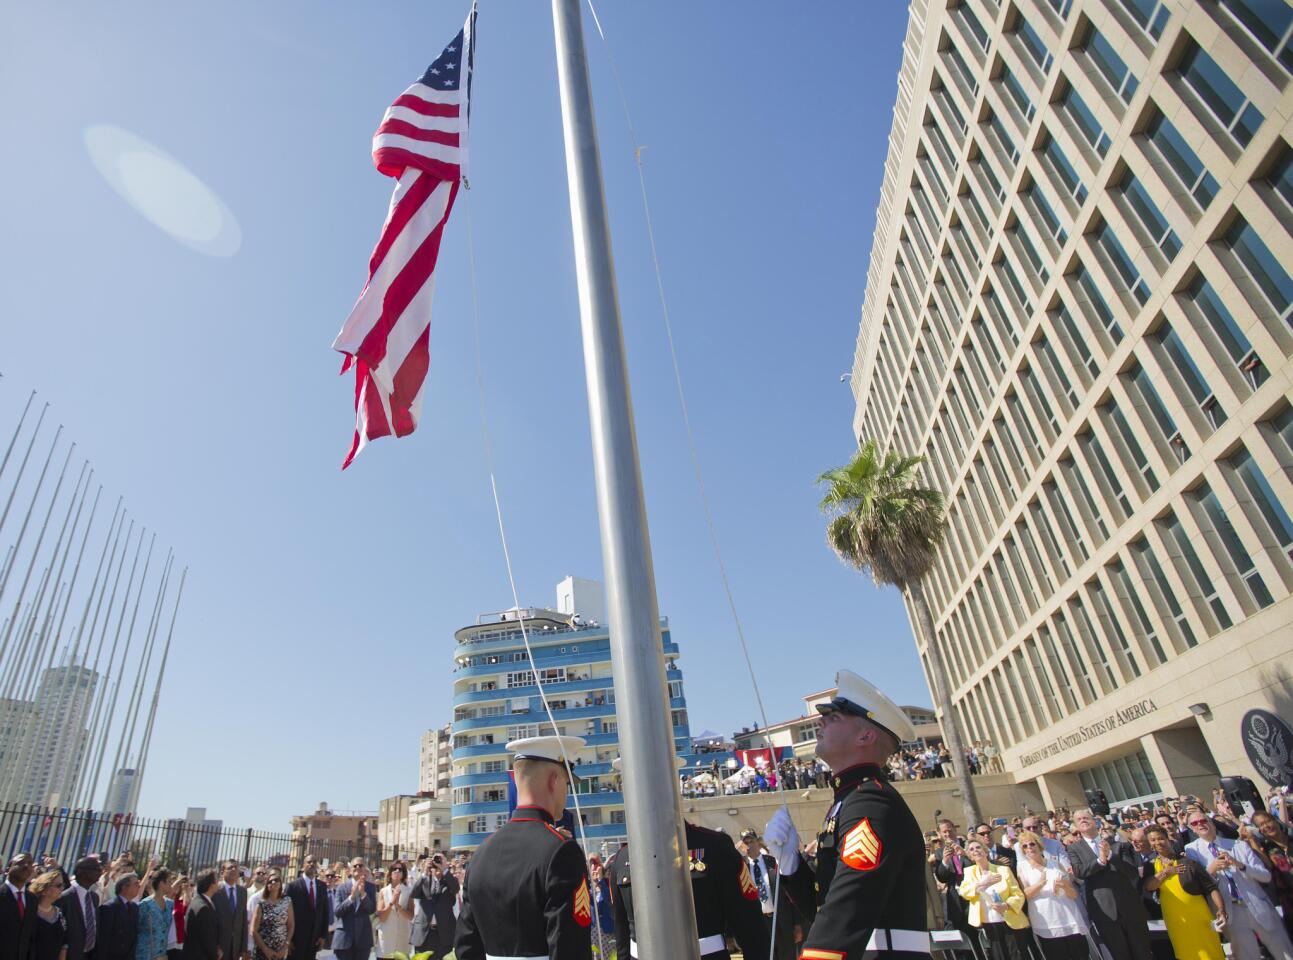 Marines raise the U.S. flag over the newly reopened American Embassy in Havana on Aug. 14.